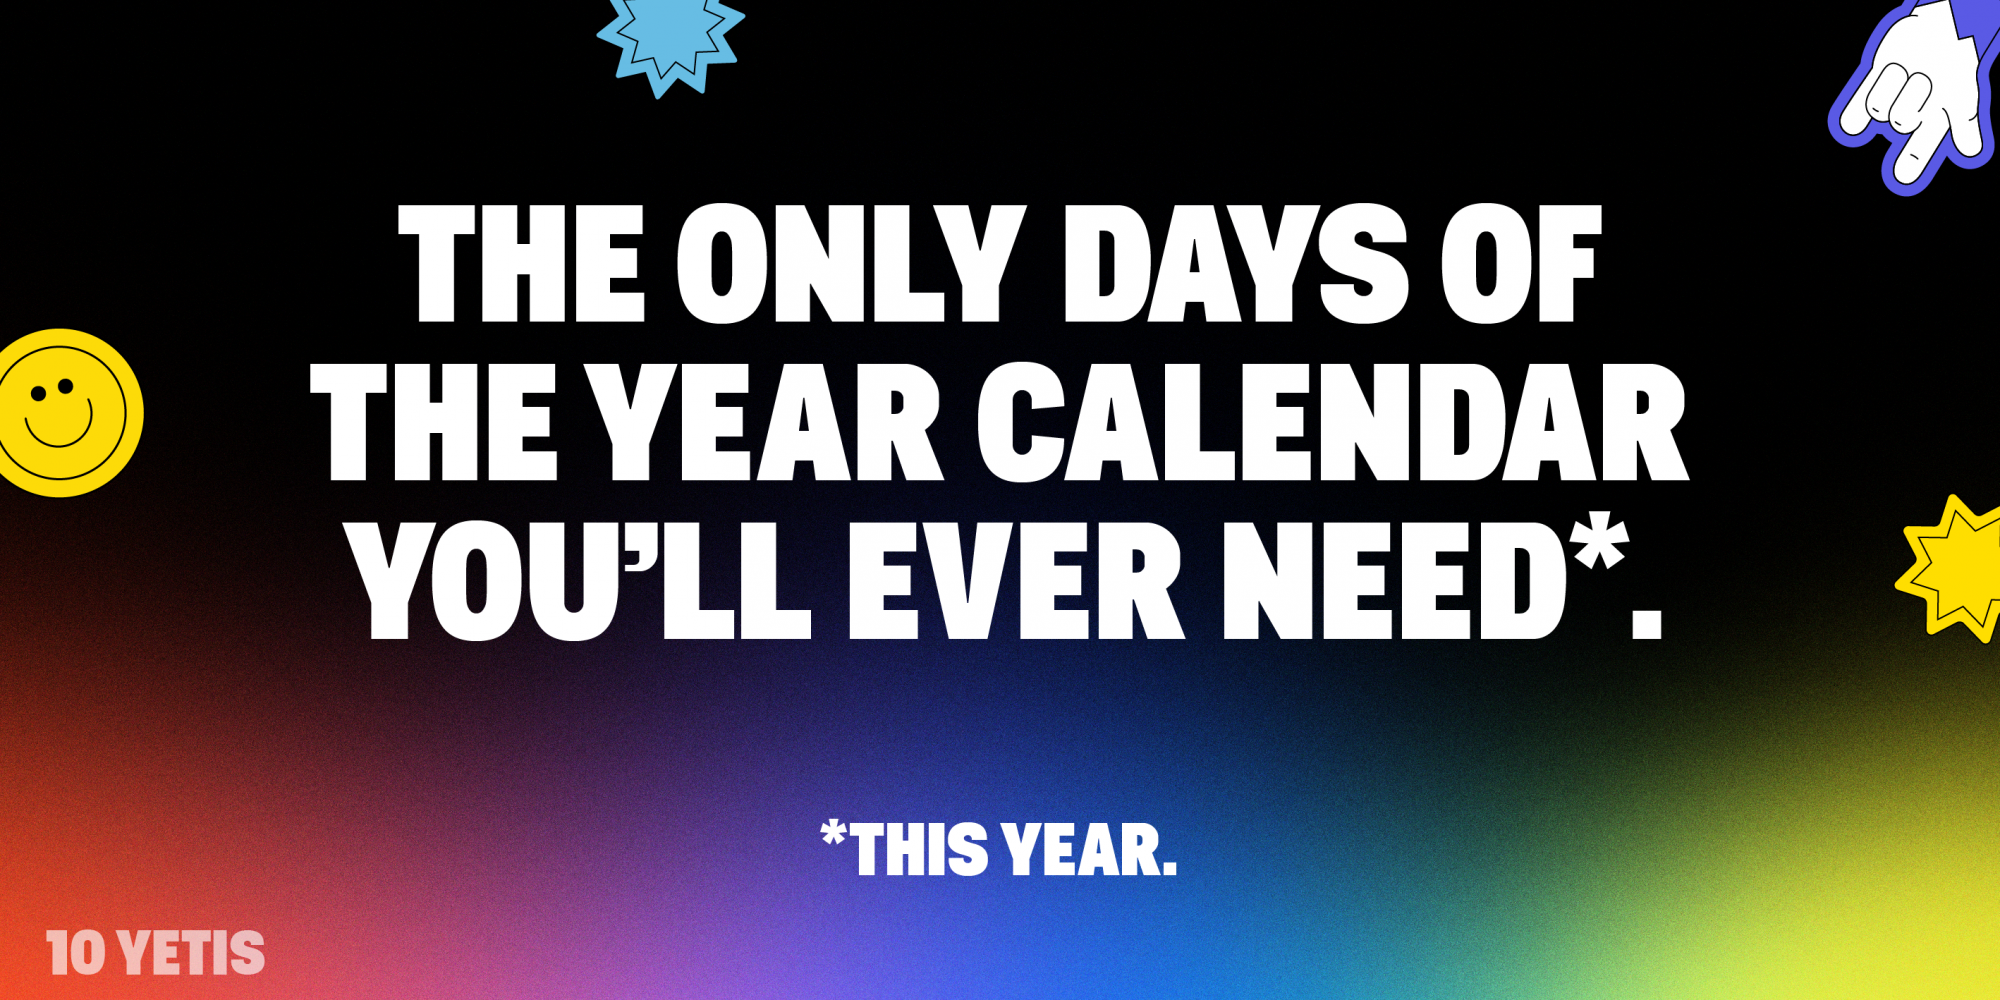 10 Yetis releases its eighth ‘Days of The Year’ free calendar, now with both online and interactive options available.